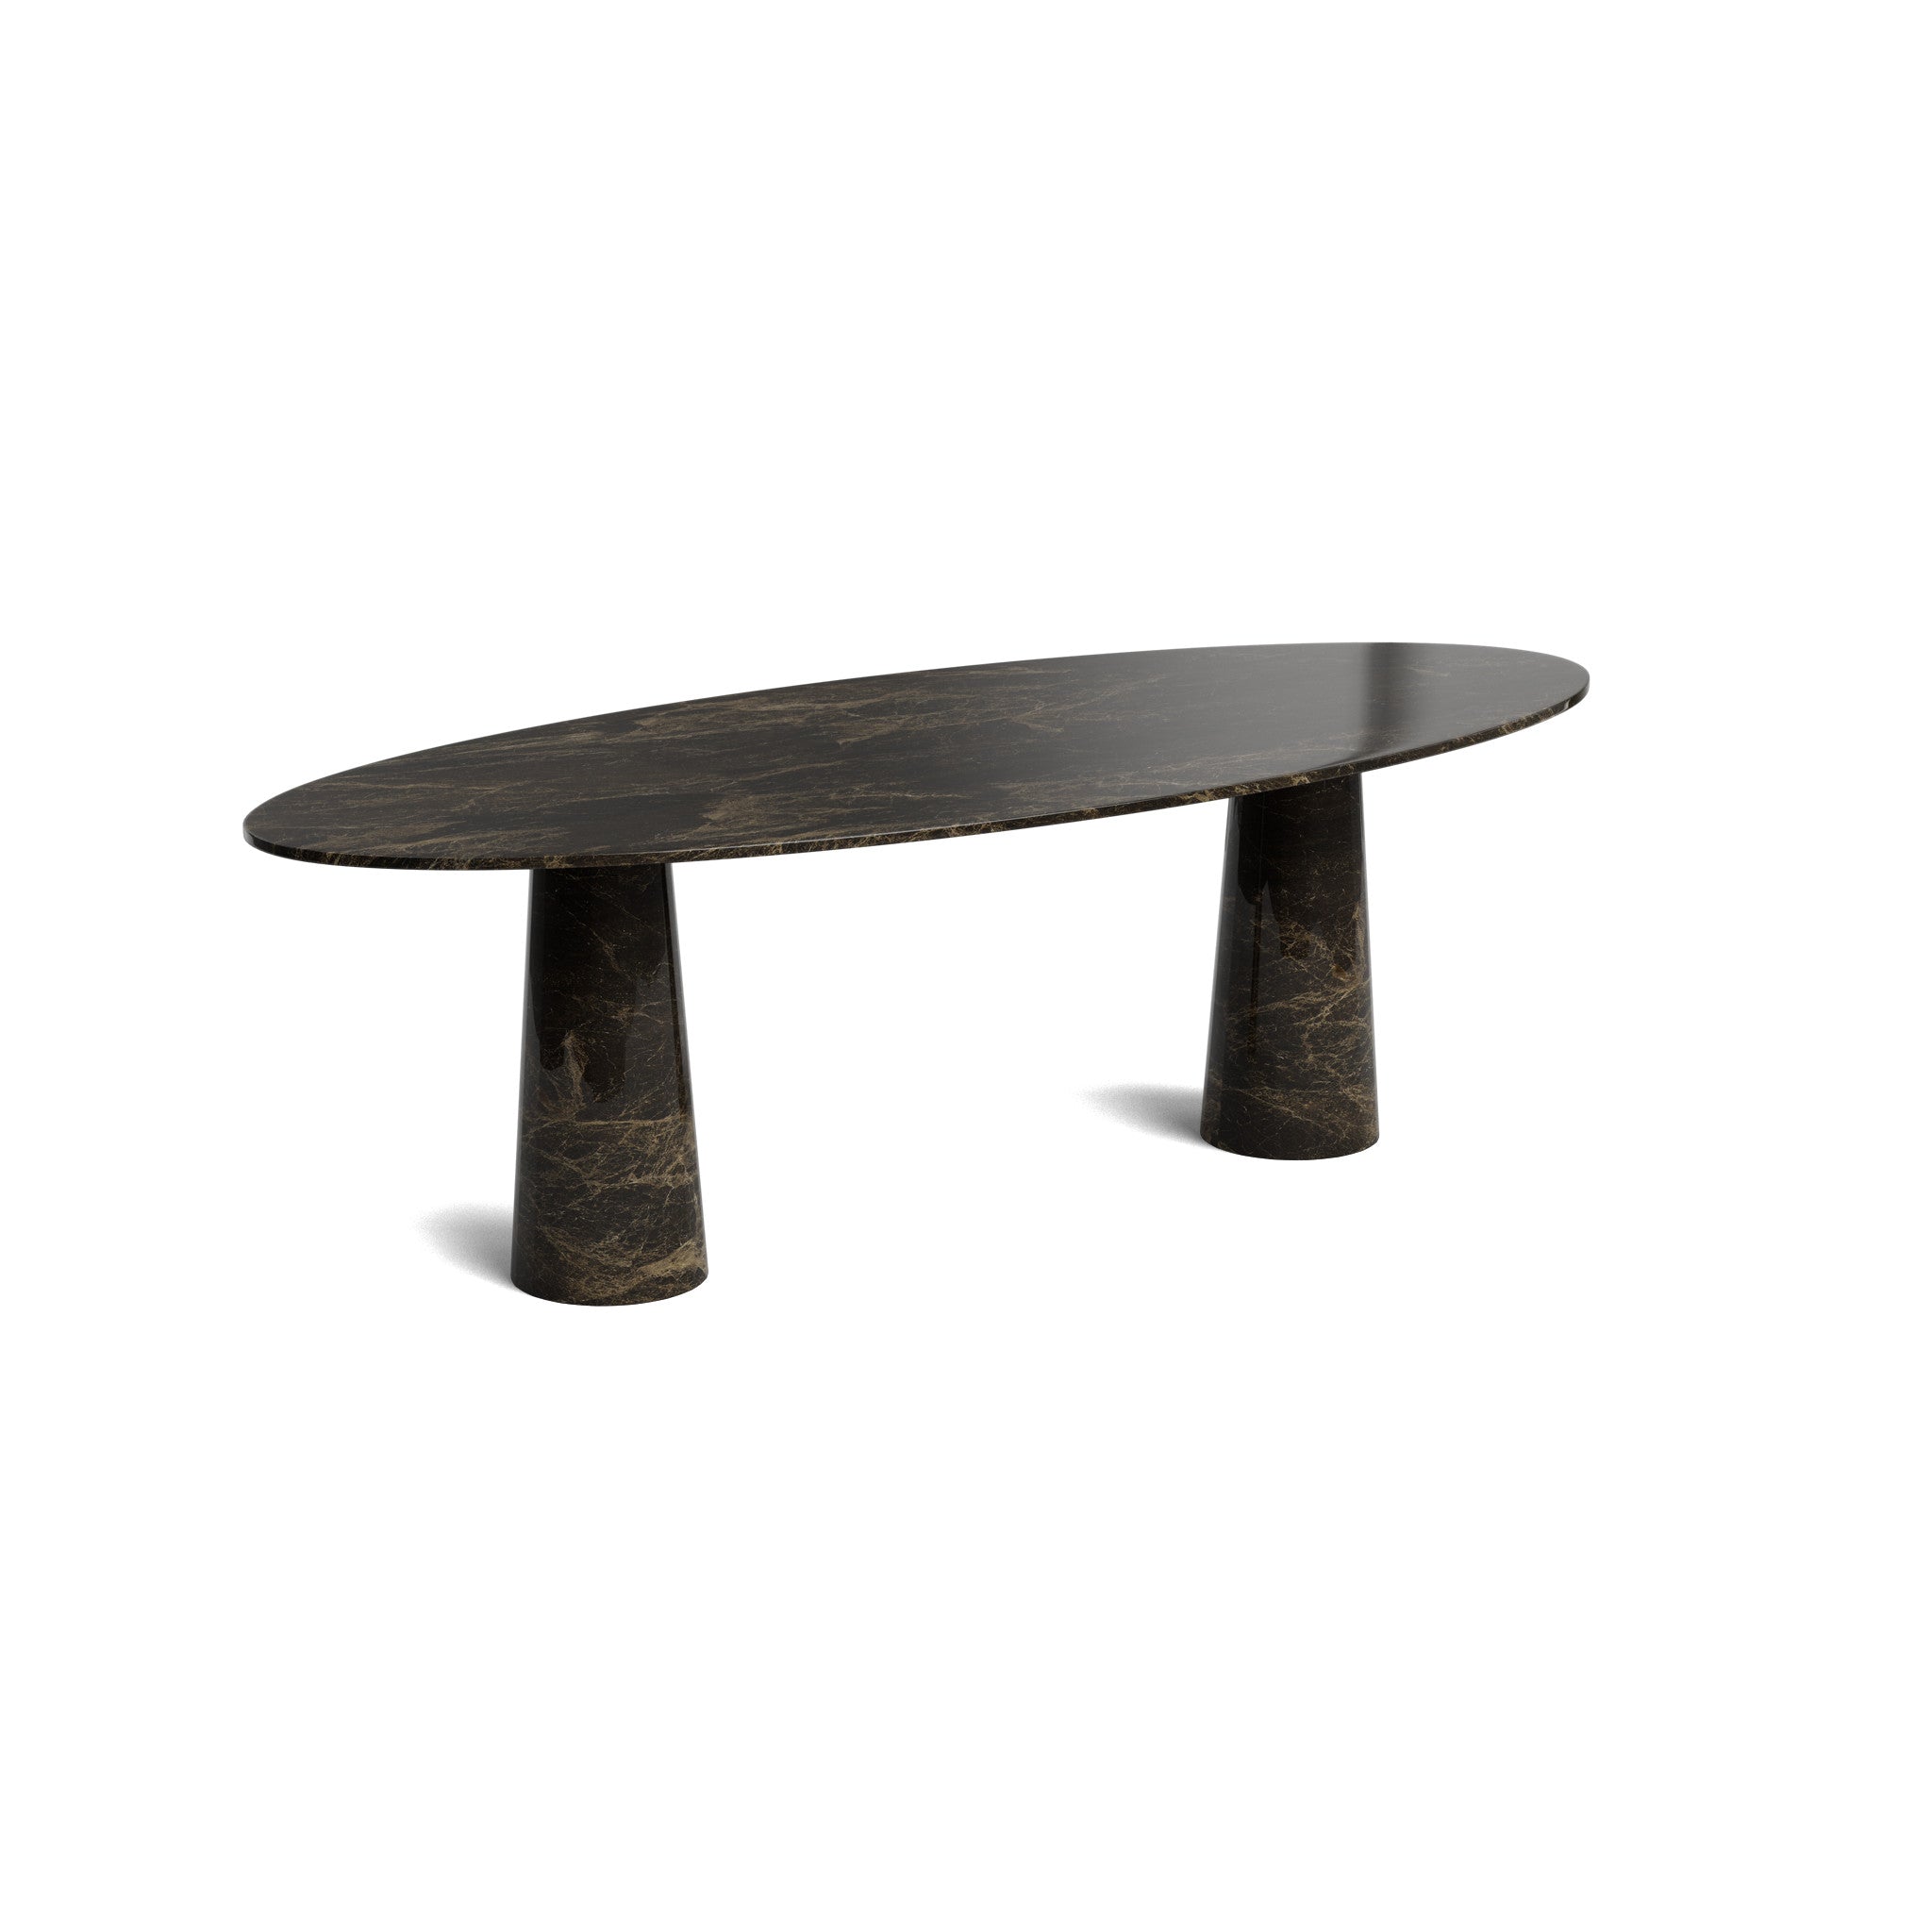 Marble oval dining table - Dark Emparador - Pebble - Polished